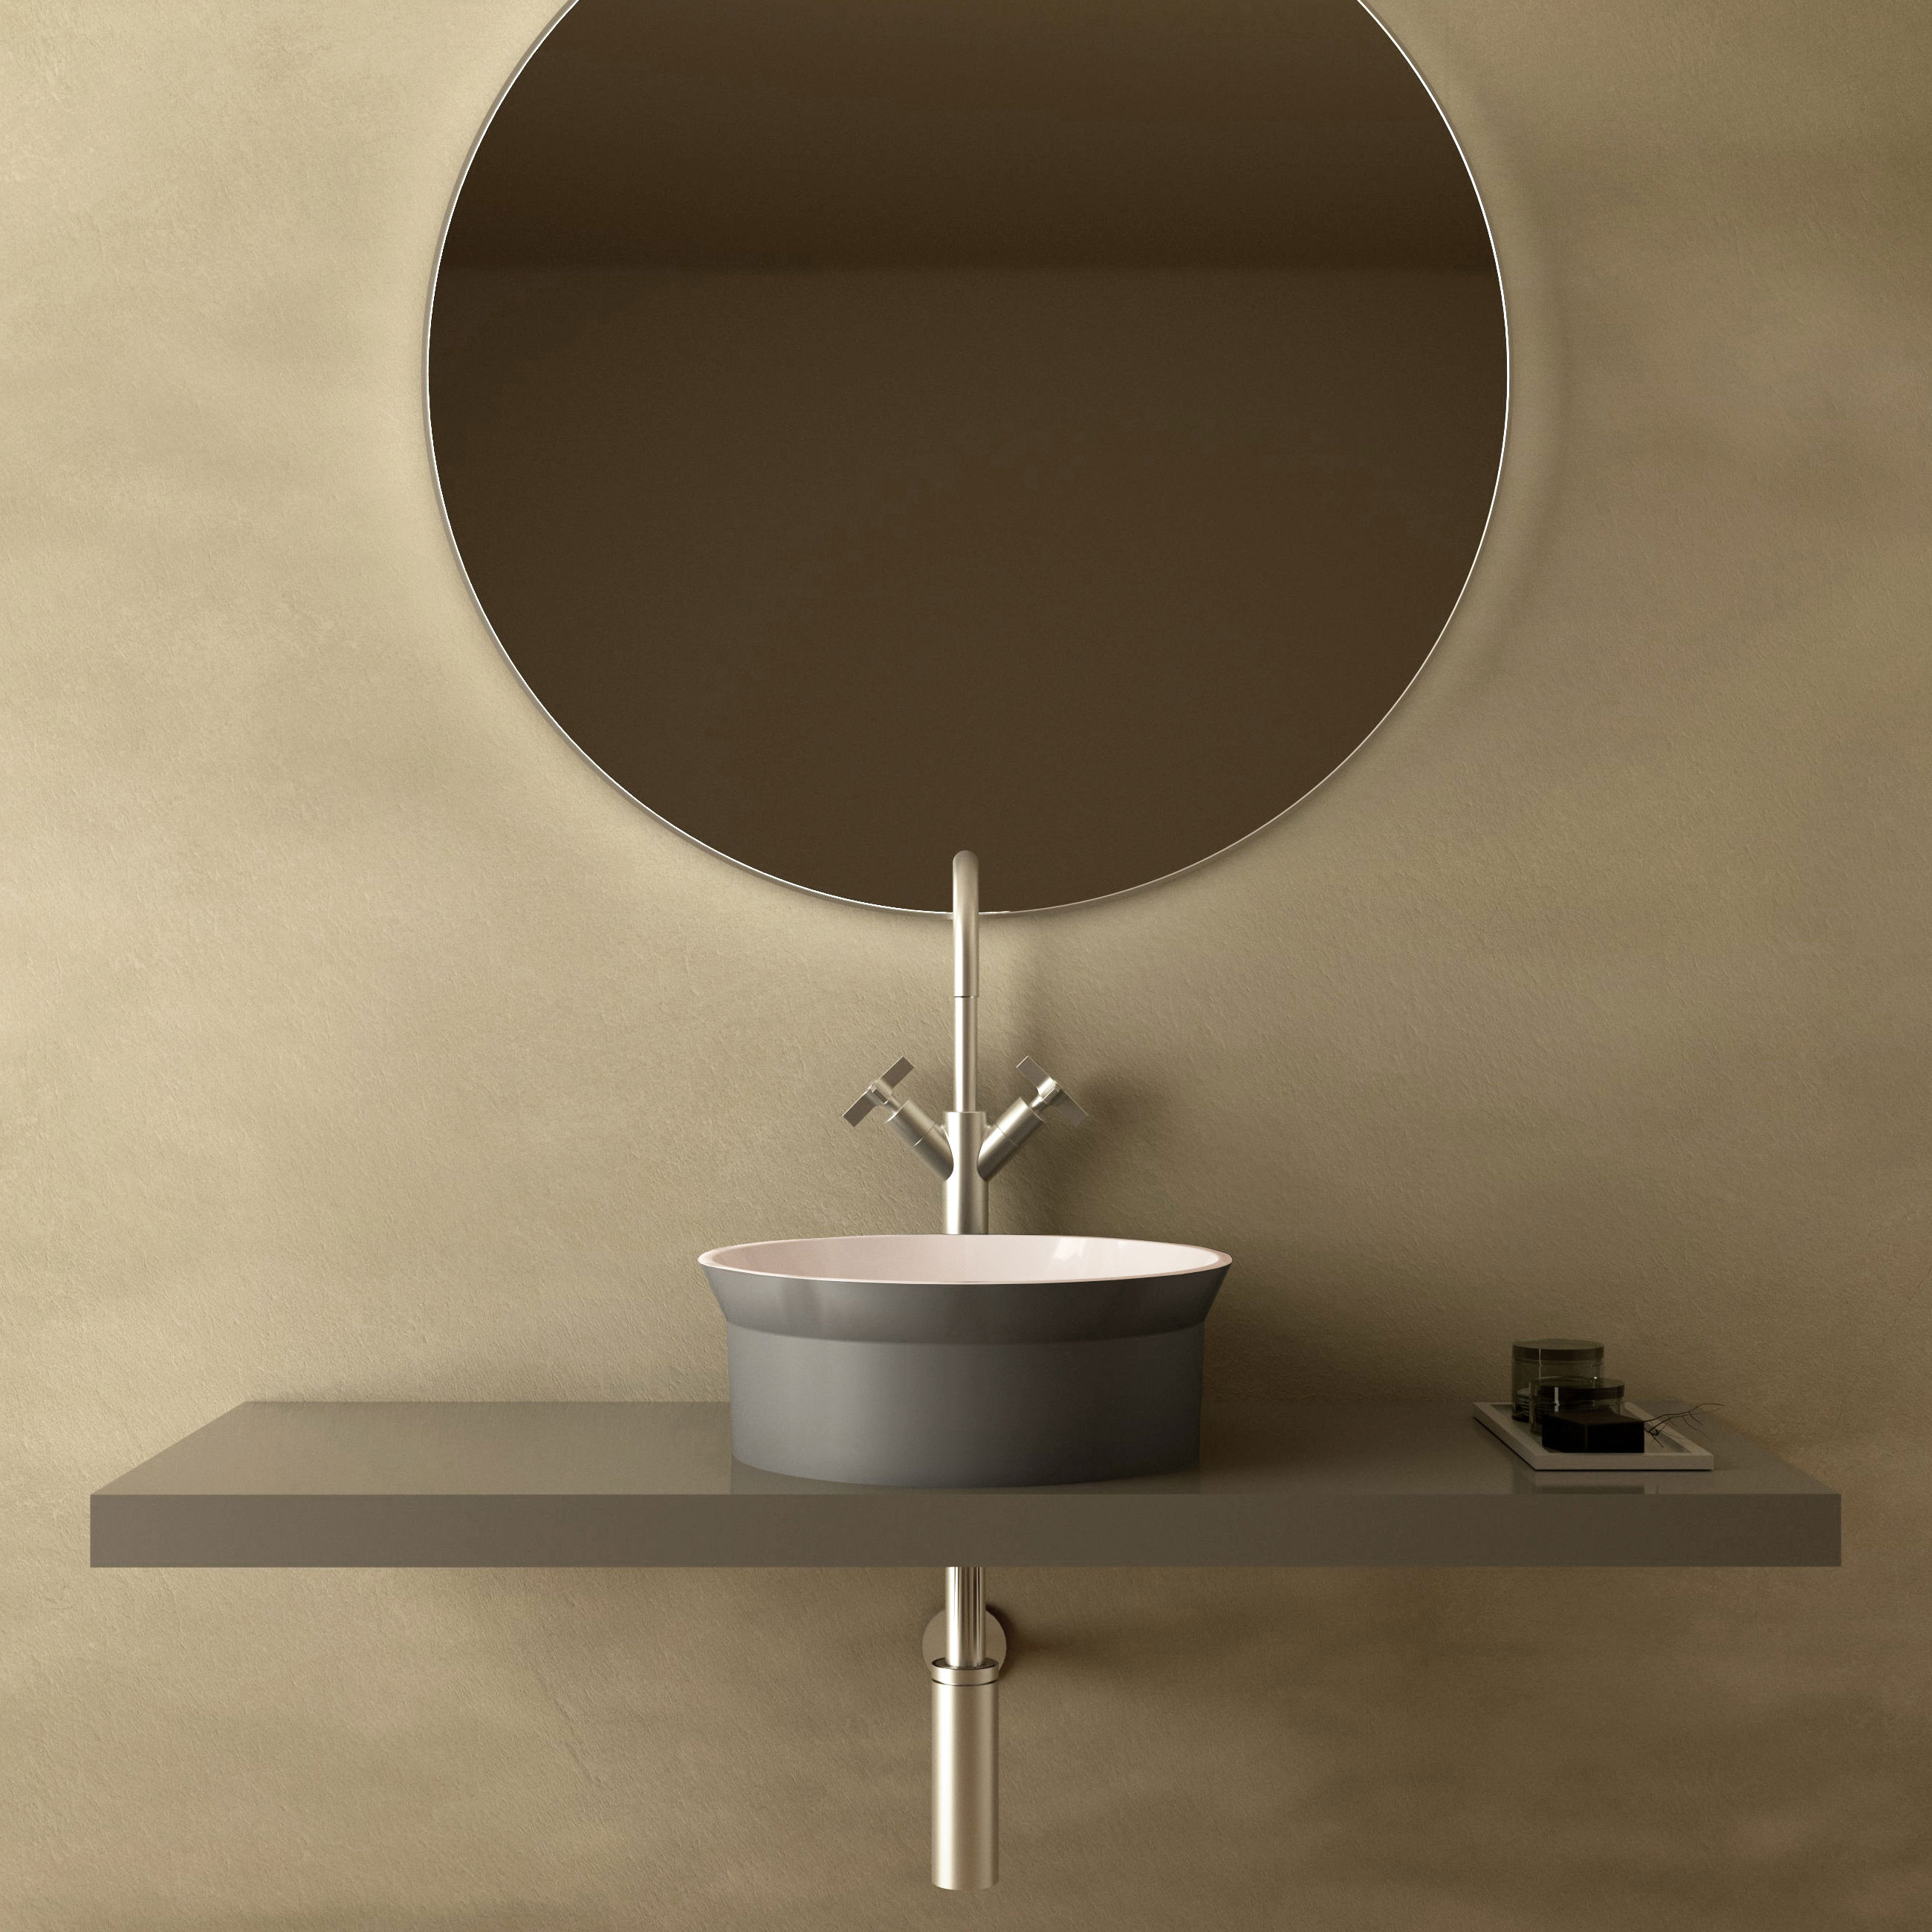 The Ayla Countertop Round Basin & Waste Cover 400x400mm